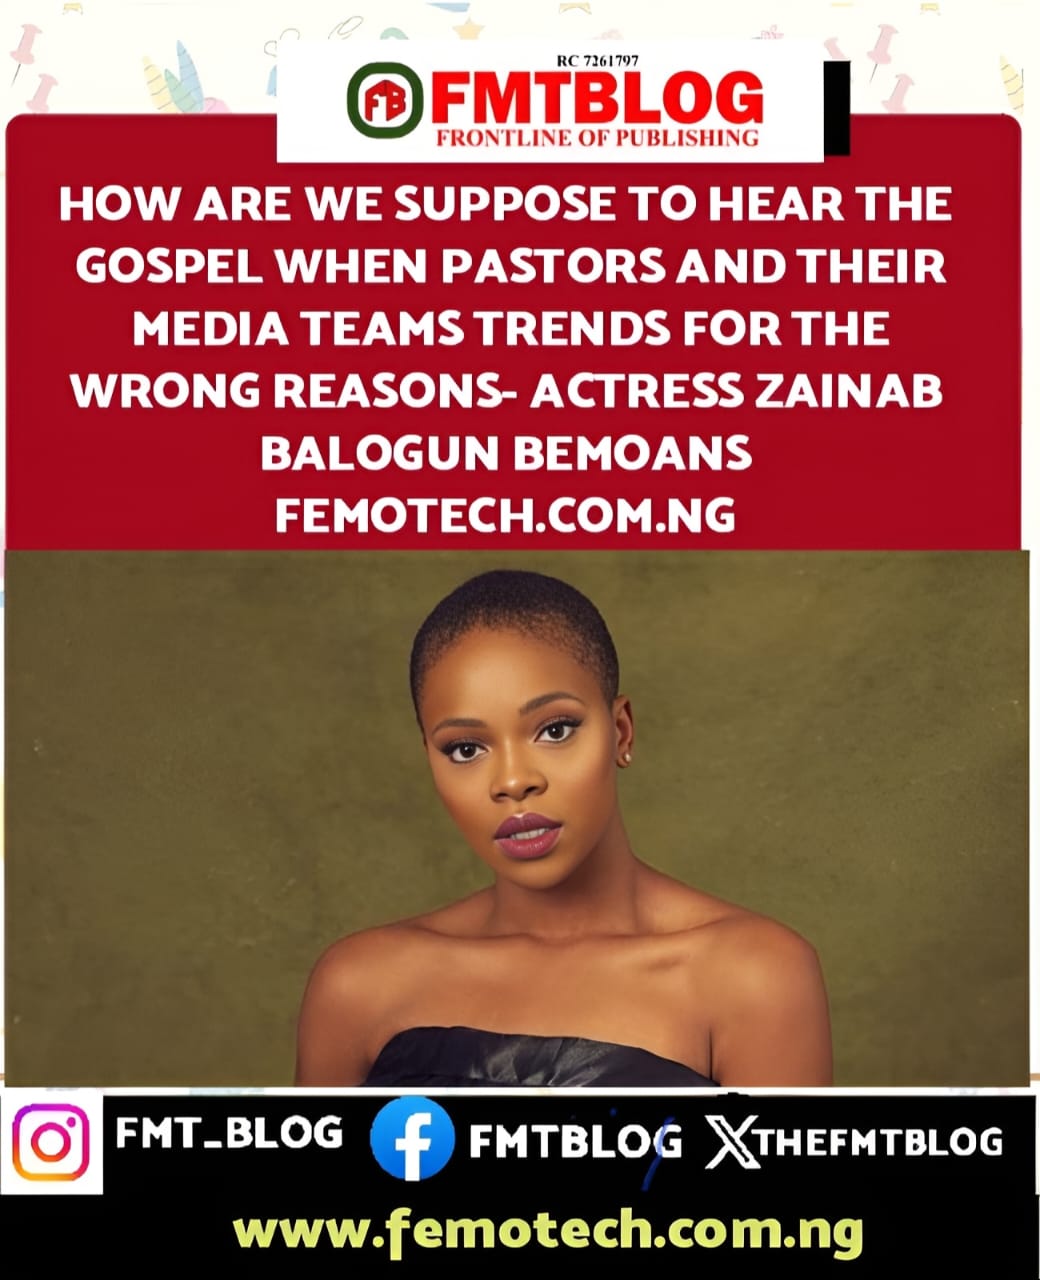 How Are We Suppose To Hear The Gospel When The Pastors And Their Media Teams Trends For The Wrong Reasons- Actress Zainab Balogun Bemoans